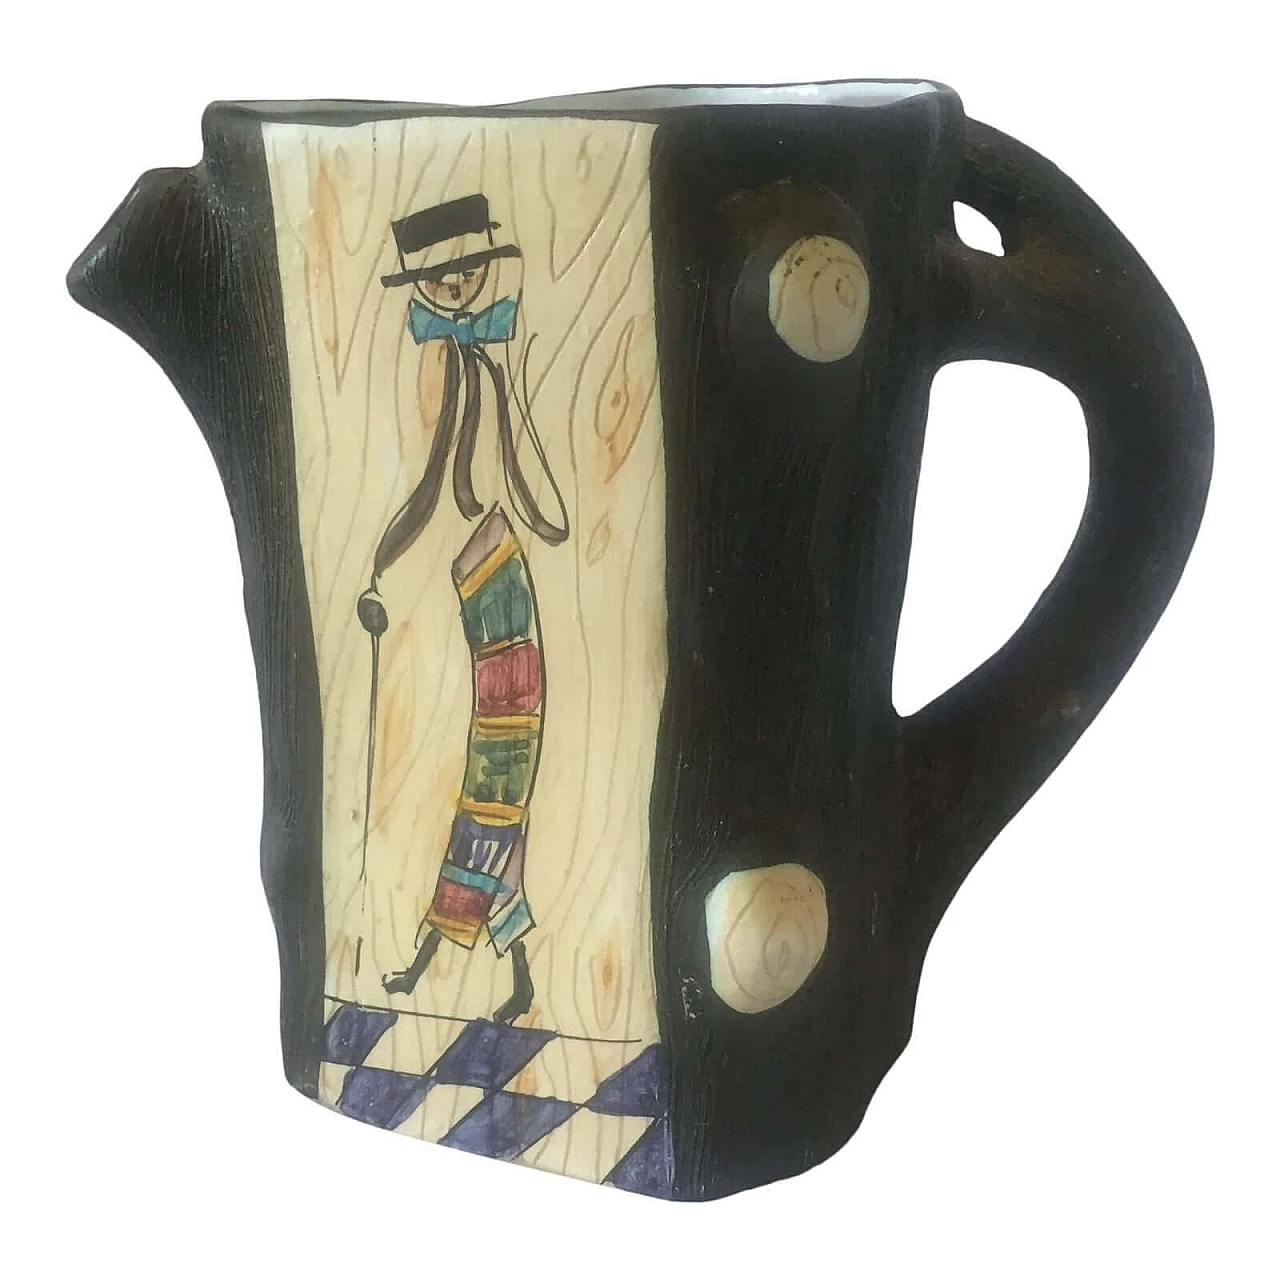 Ceramic jug painted with stylised figures, 1960s 1374954